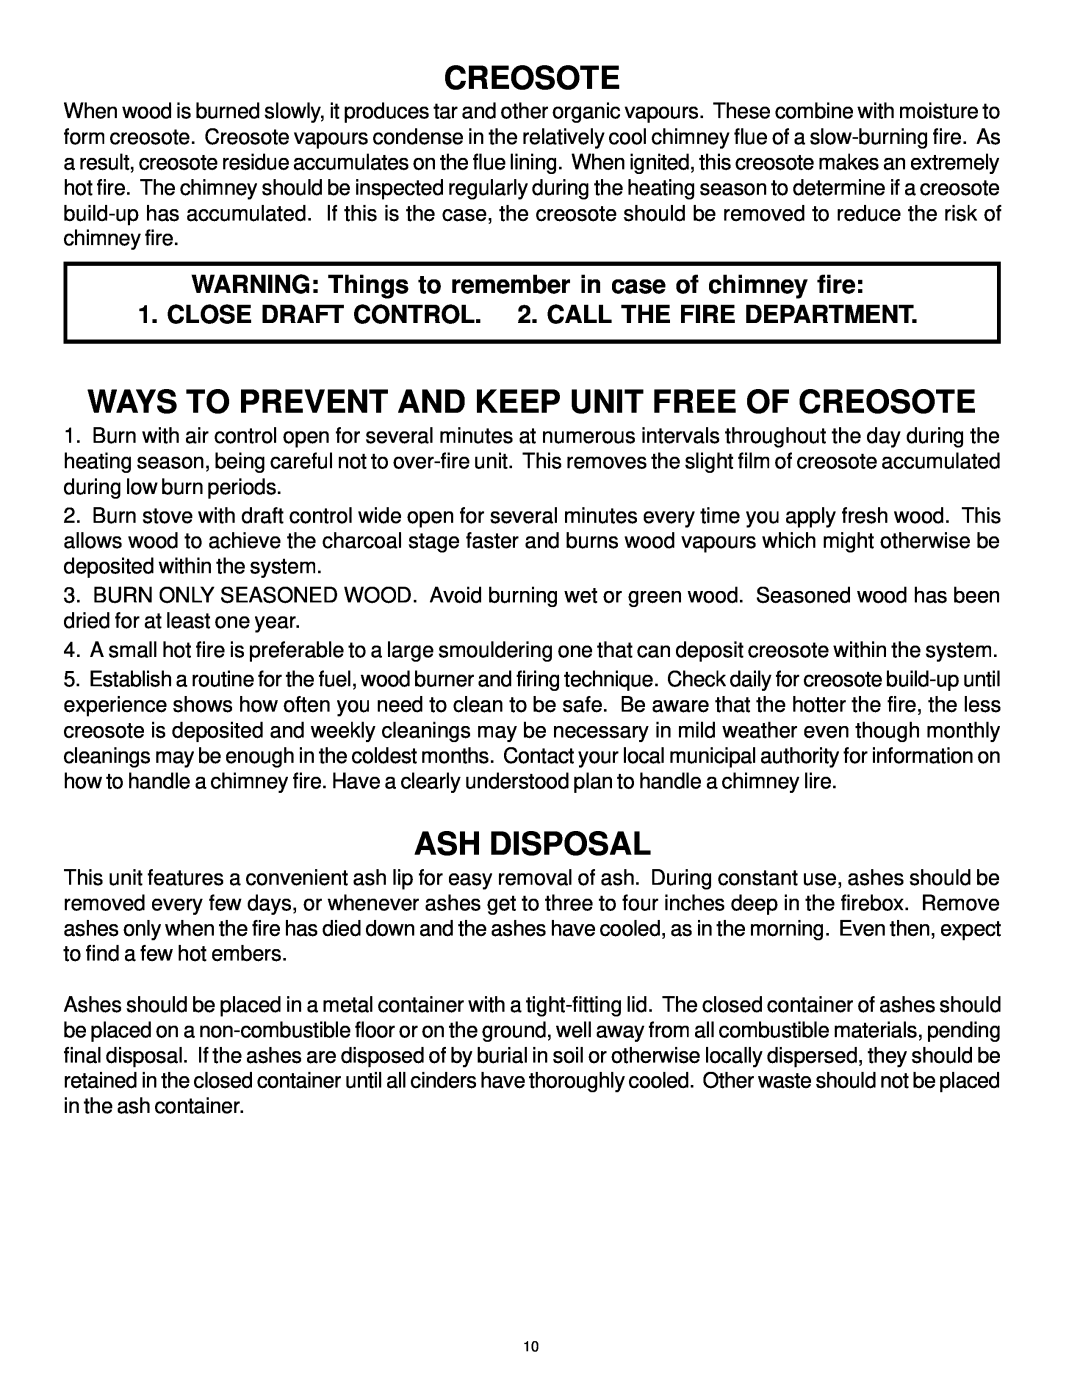 Vermont Casting AIR TIGHT WOOD STOVE owner manual Ways To Prevent And Keep Unit Free Of Creosote, Ash Disposal 